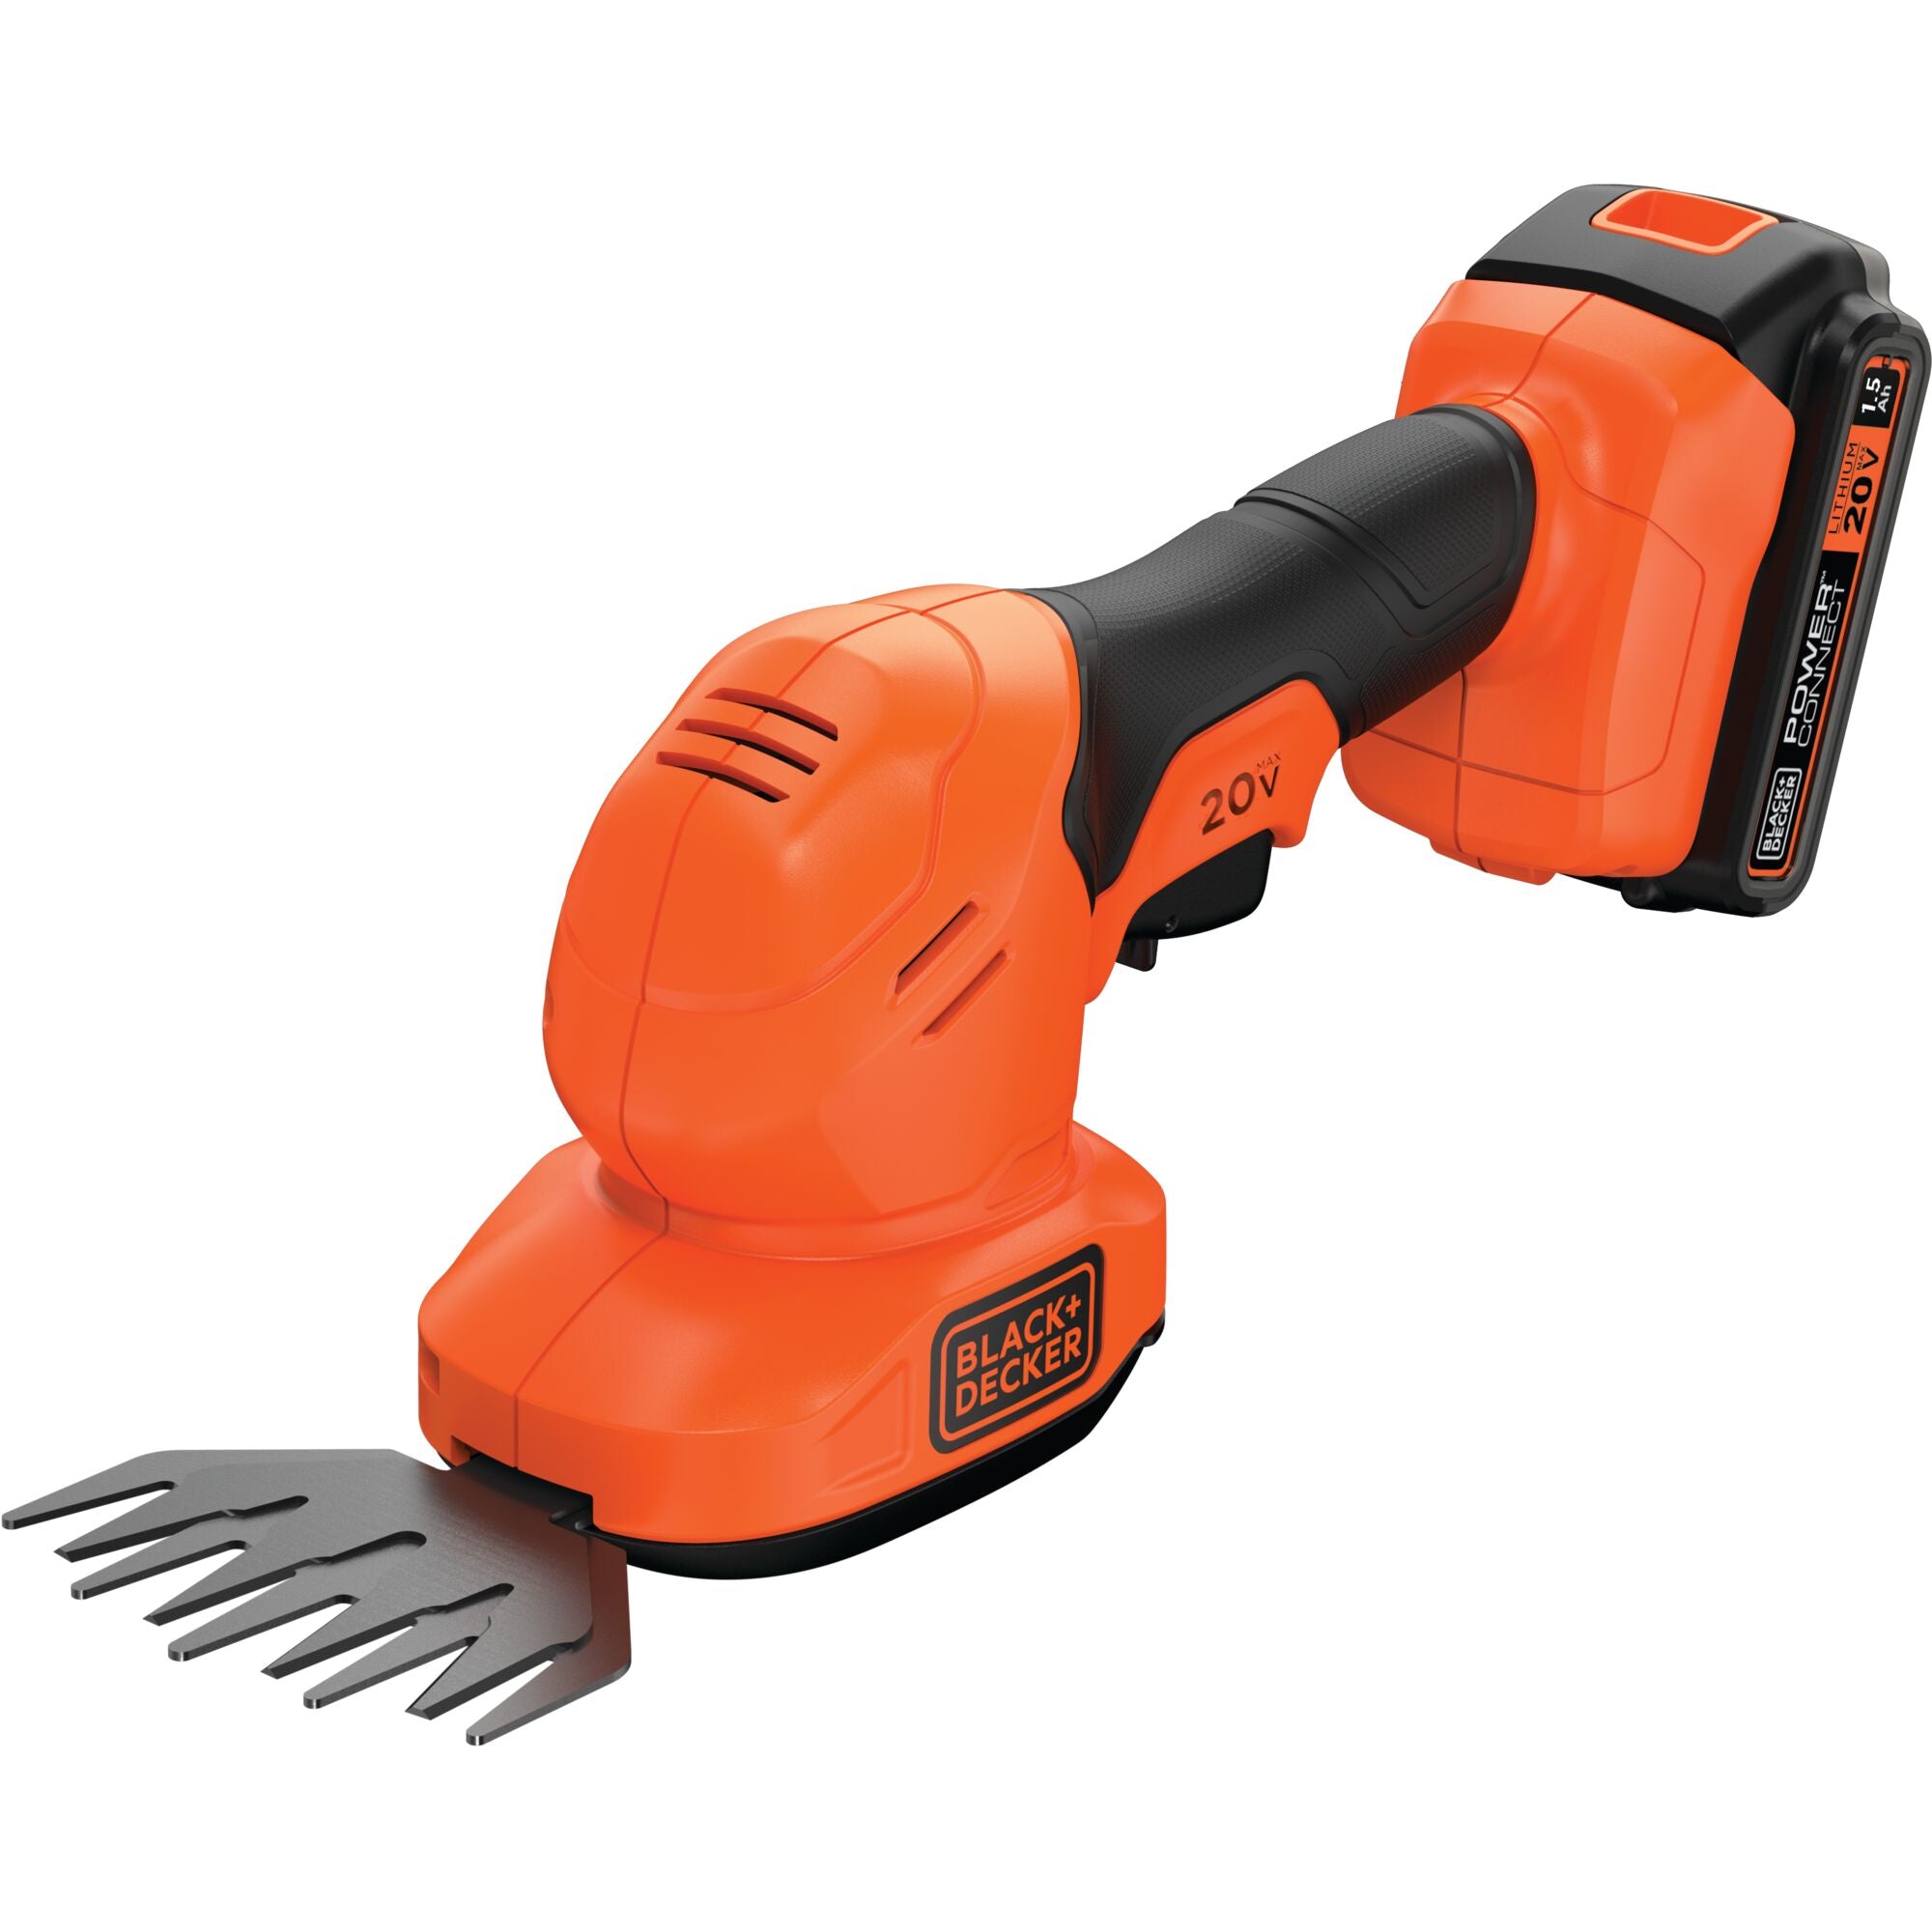 A person trims grass with the BLACK+DECKER POWERCONNECT™ 20V MAX* 3/8-in. Cordless Shear Shrubber Kit. Portable design, cordless for easy maneuvering.